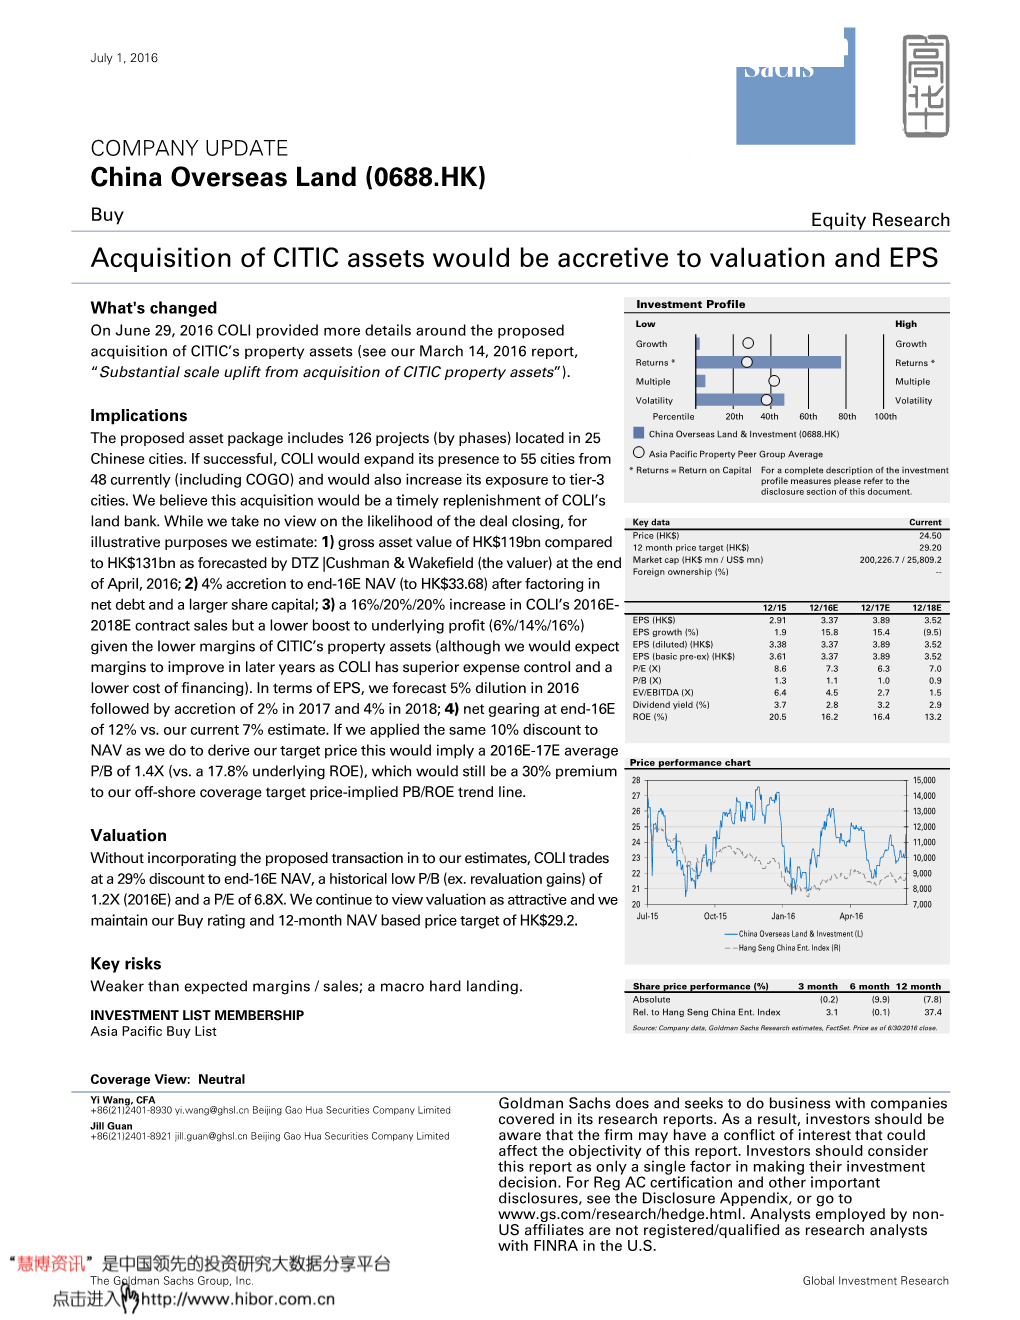 Acquisition of CITIC Assets Would Be Accretive to Valuation and EPS